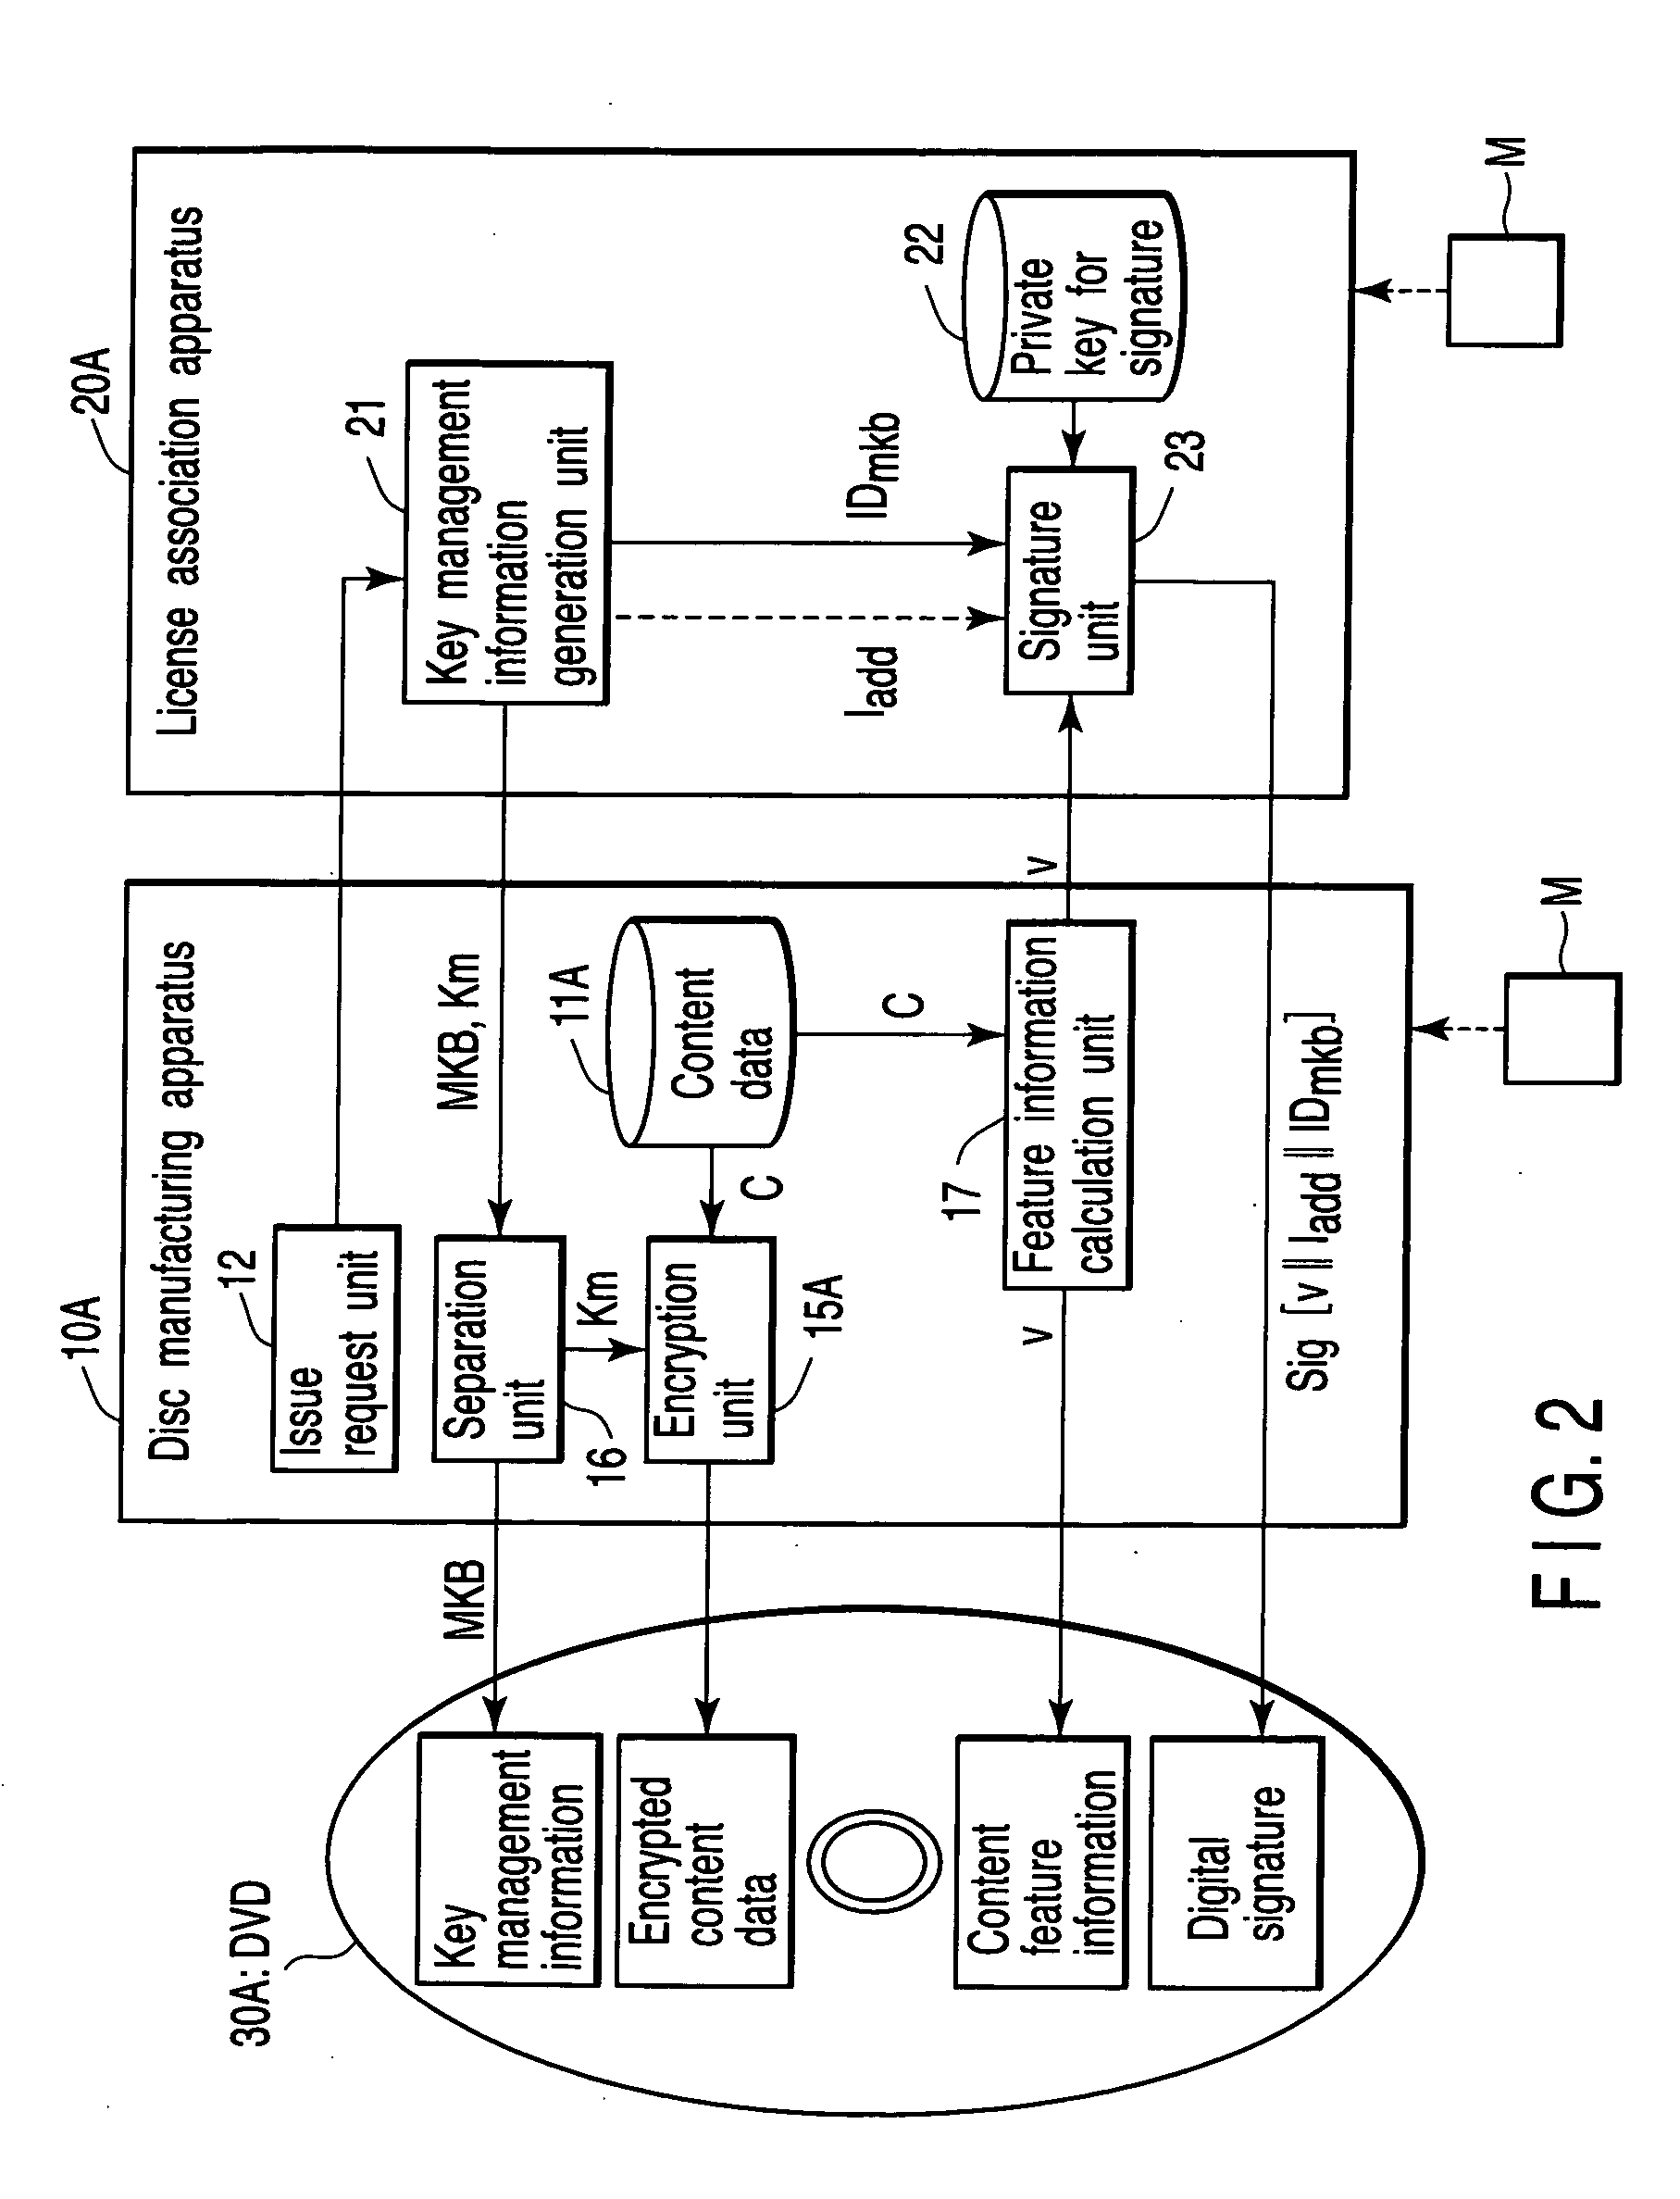 Method, apparatus and program for protecting content